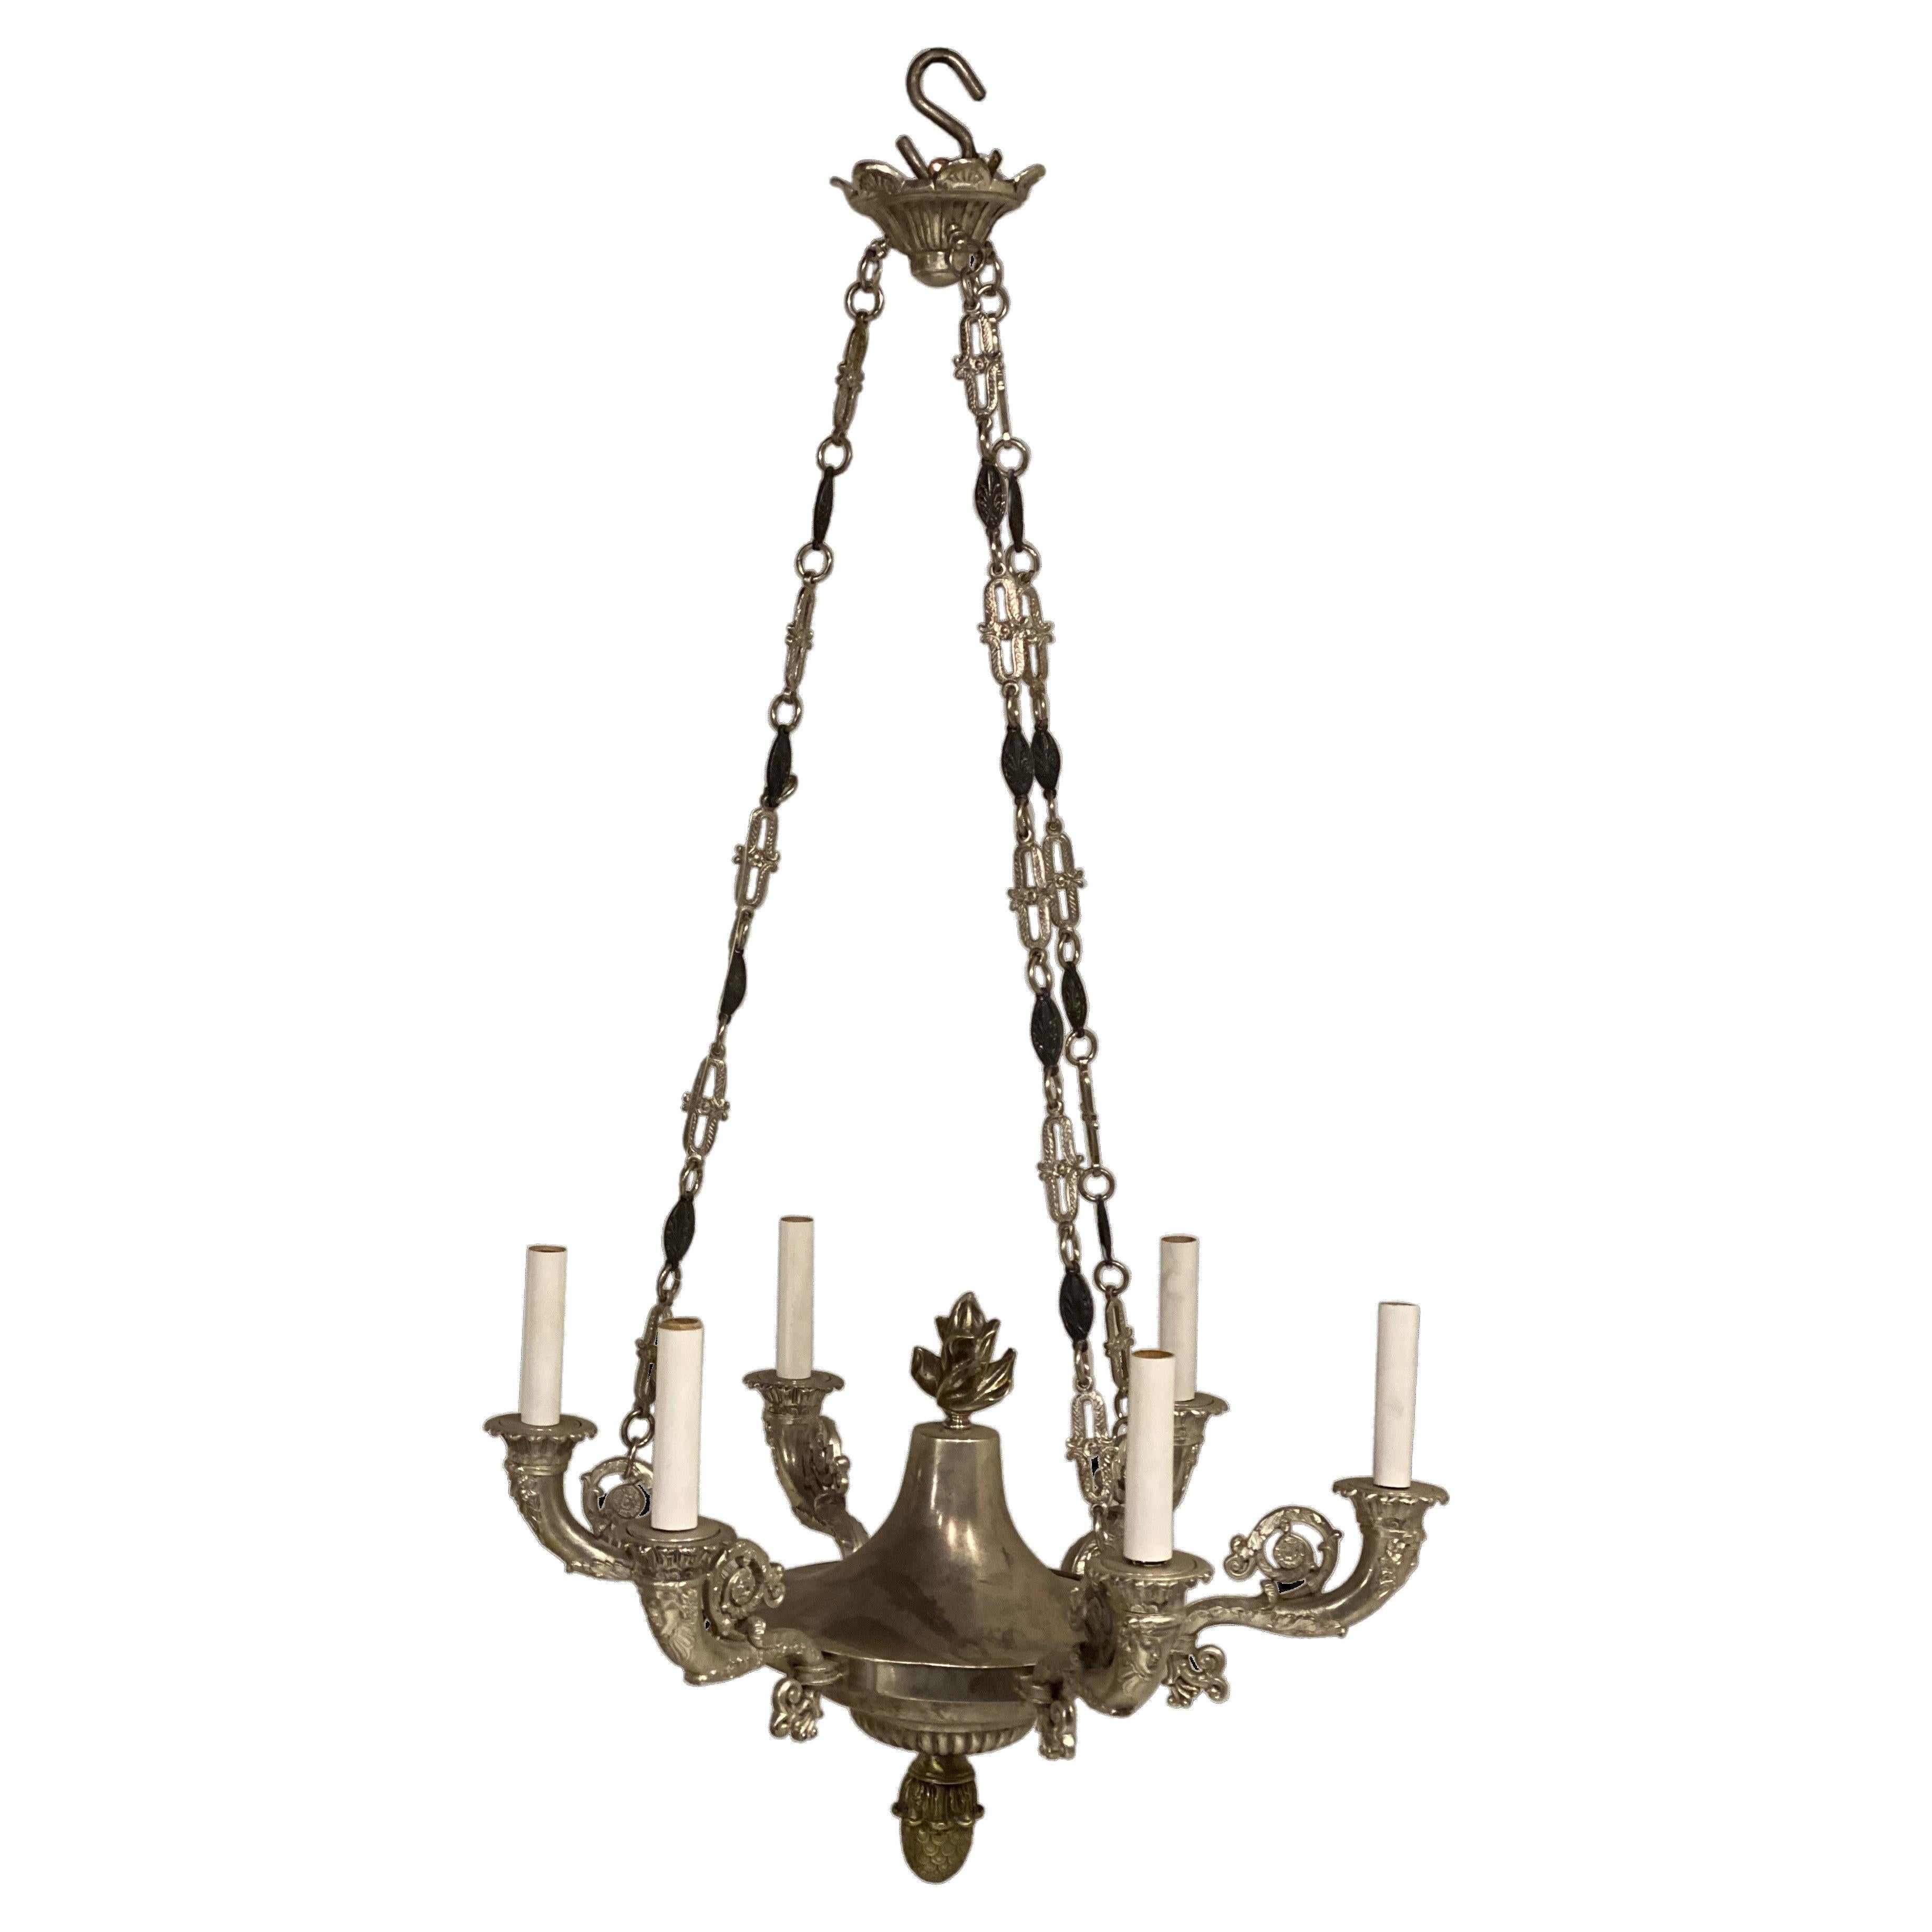 1930's French Empire Silver Plated Chandelier with 6 lights